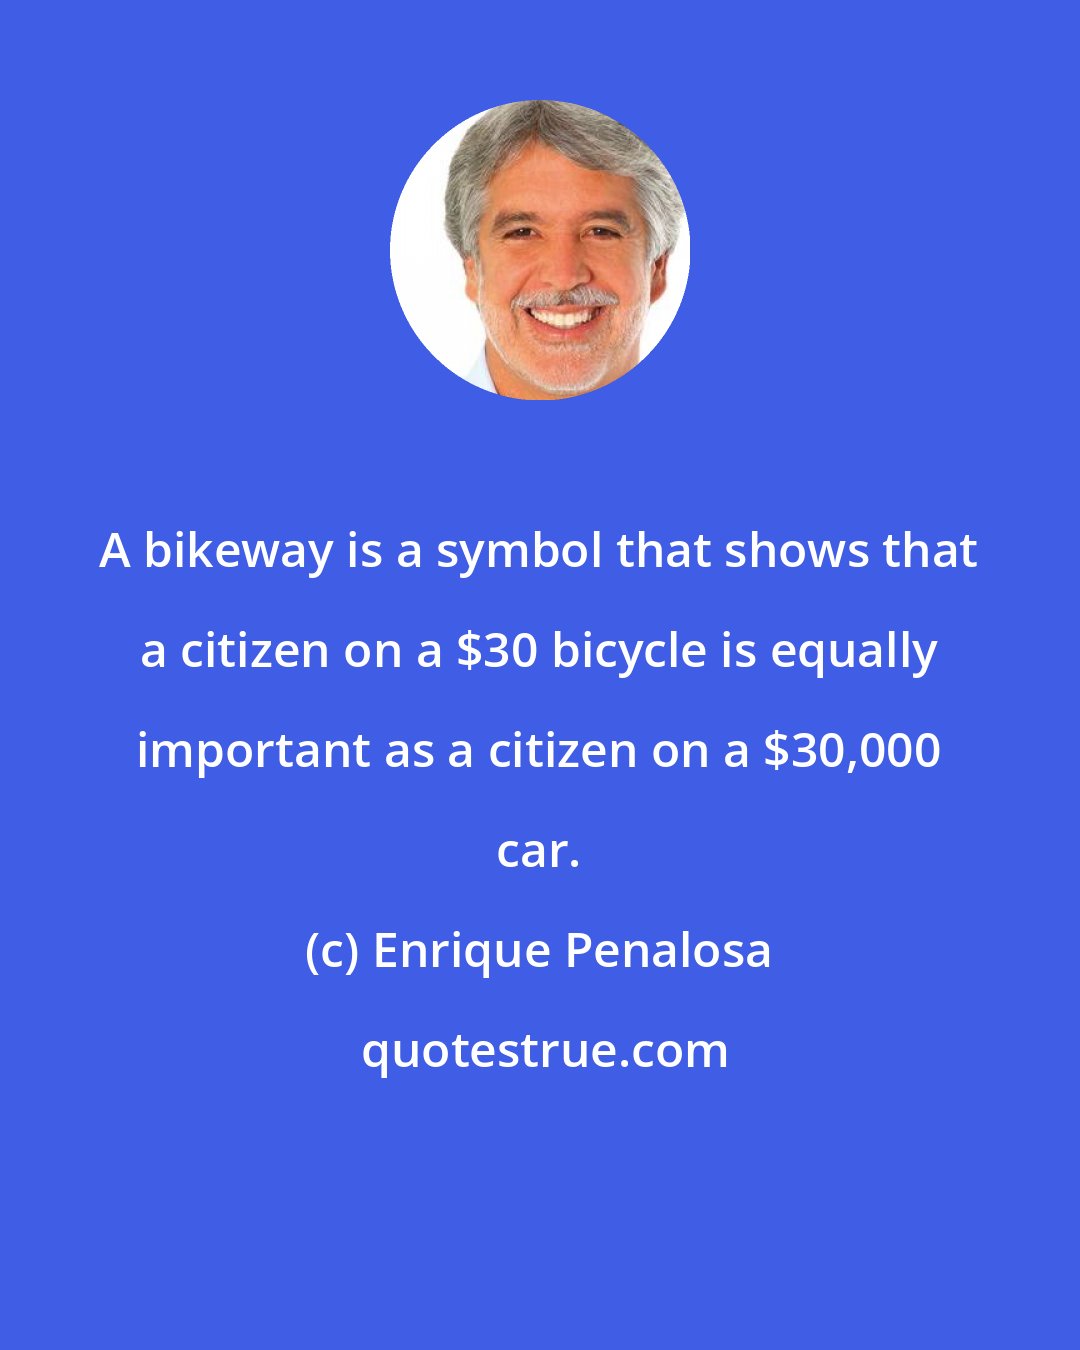 Enrique Penalosa: A bikeway is a symbol that shows that a citizen on a $30 bicycle is equally important as a citizen on a $30,000 car.